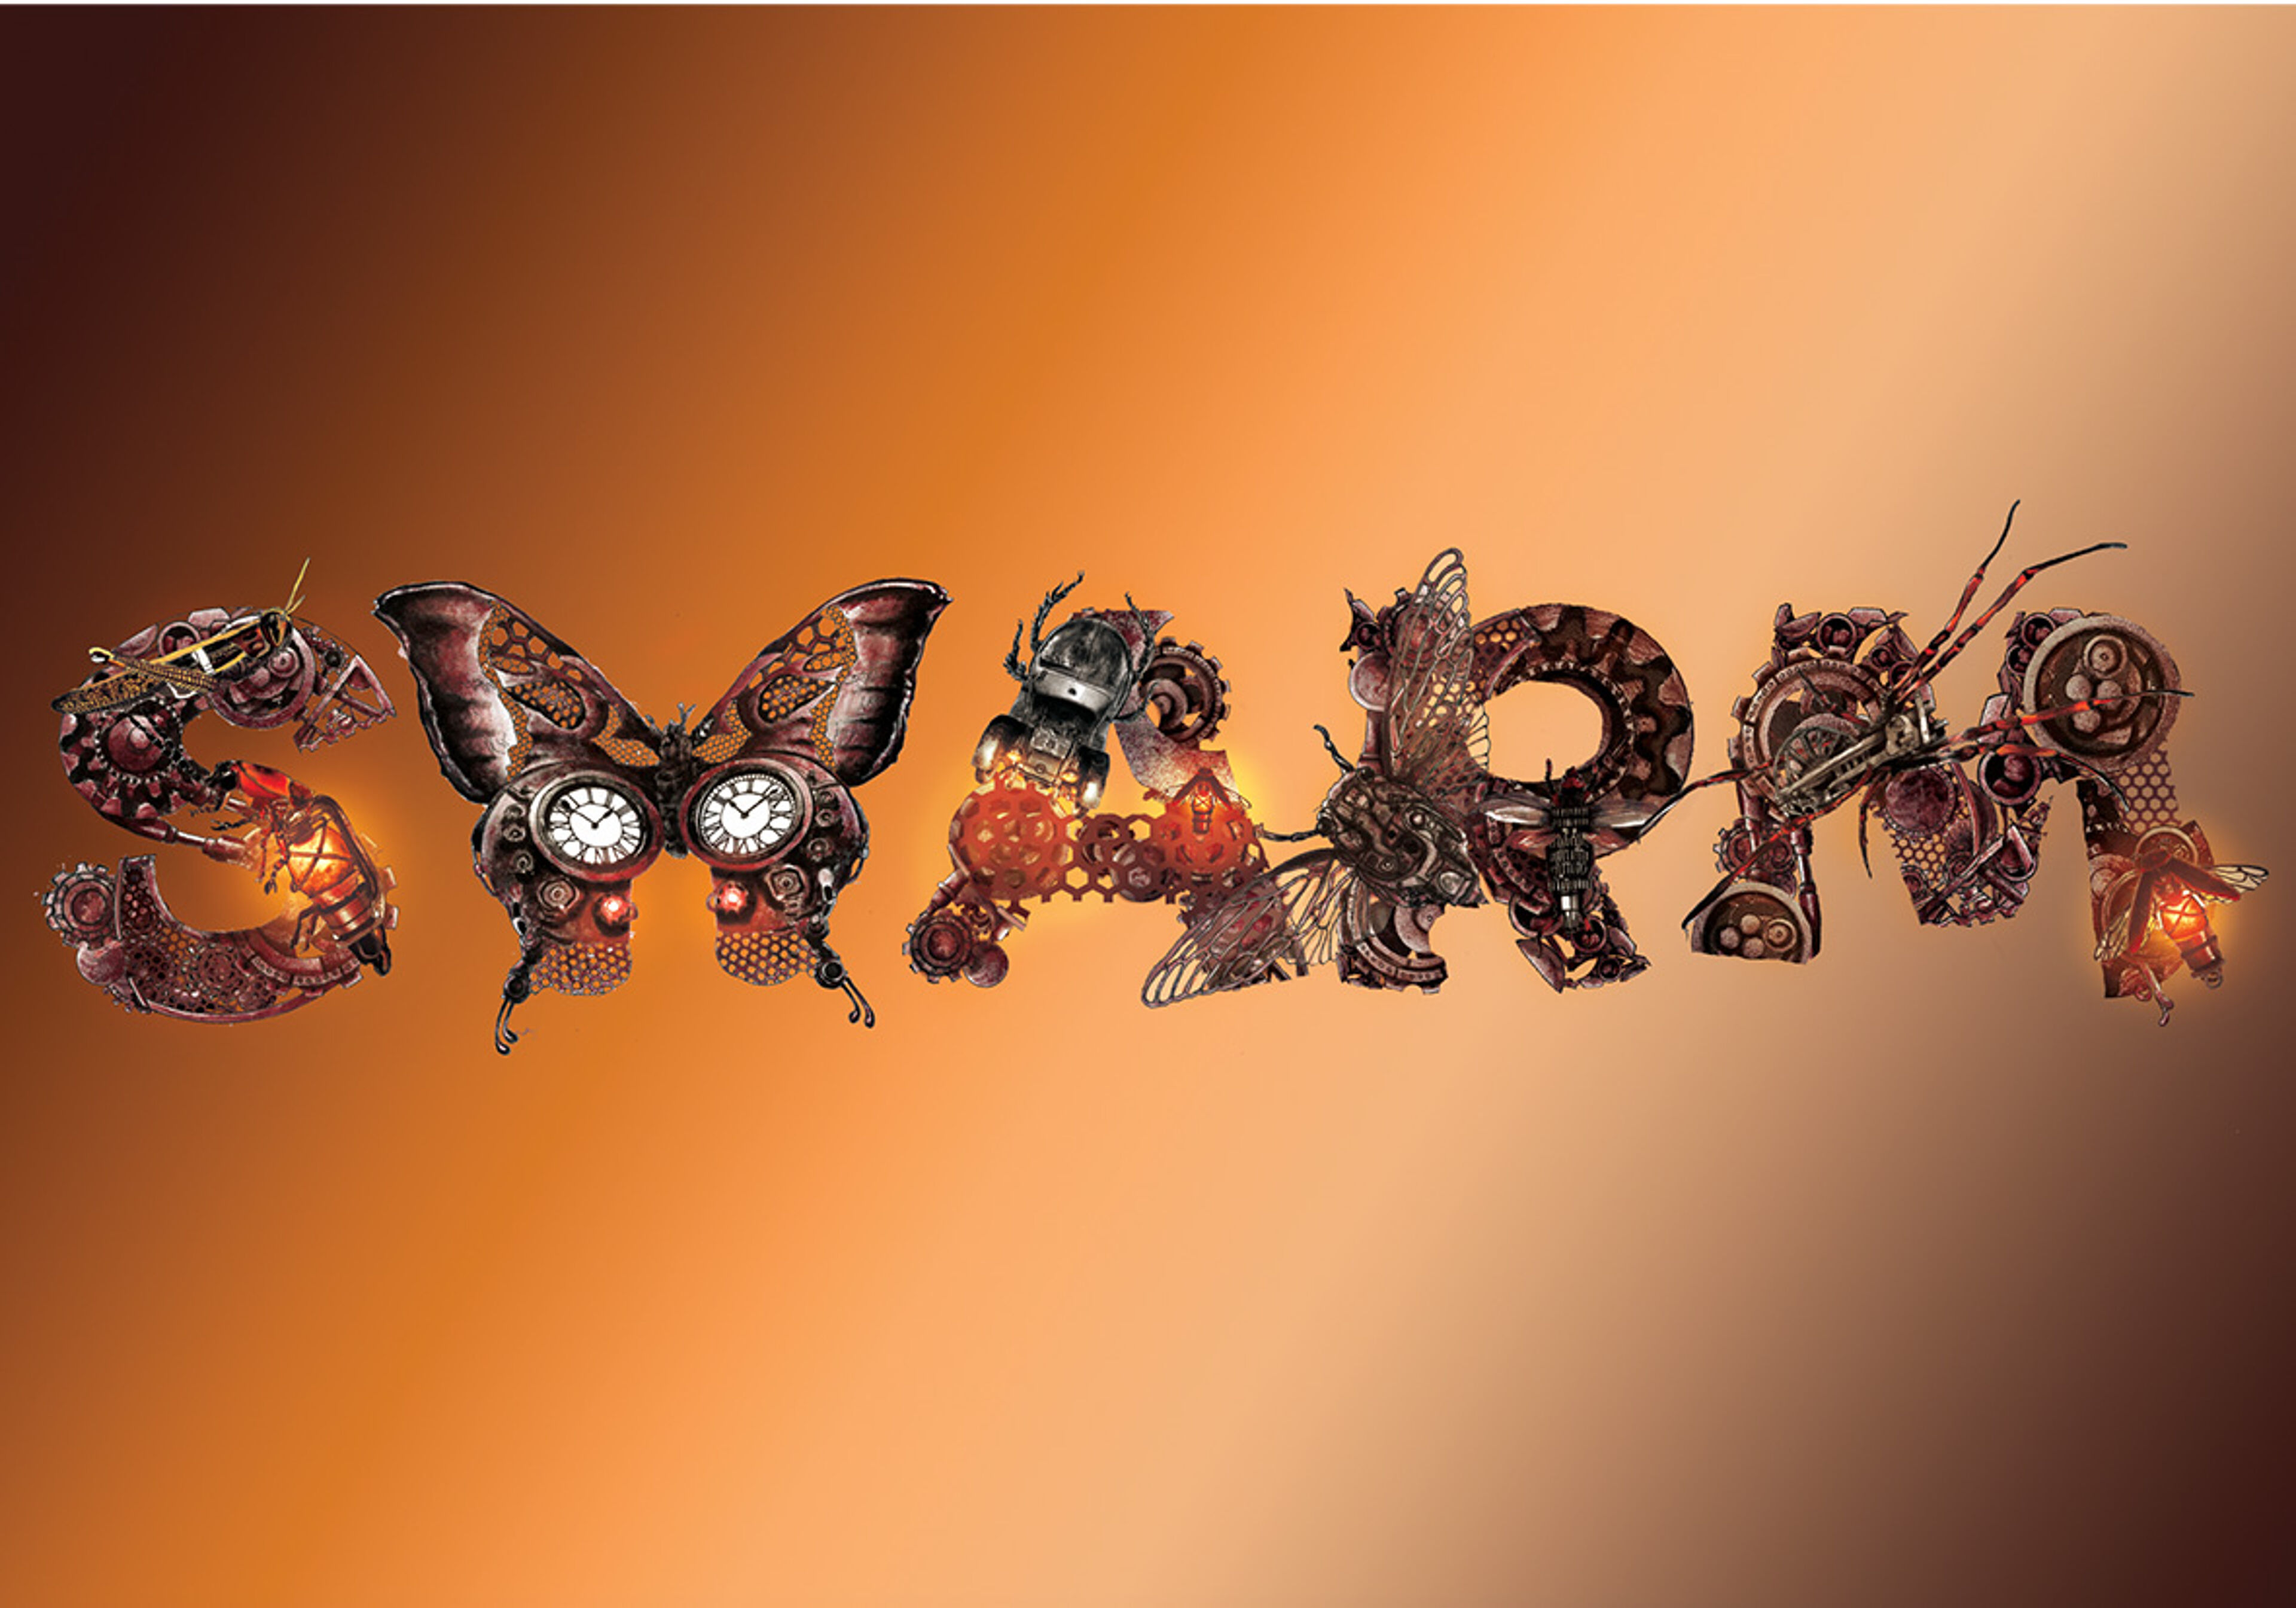 A decorative word 'SWARM' crafted in a steampunk style, with each letter formed from mechanical insects and gears on a warm gradient background.